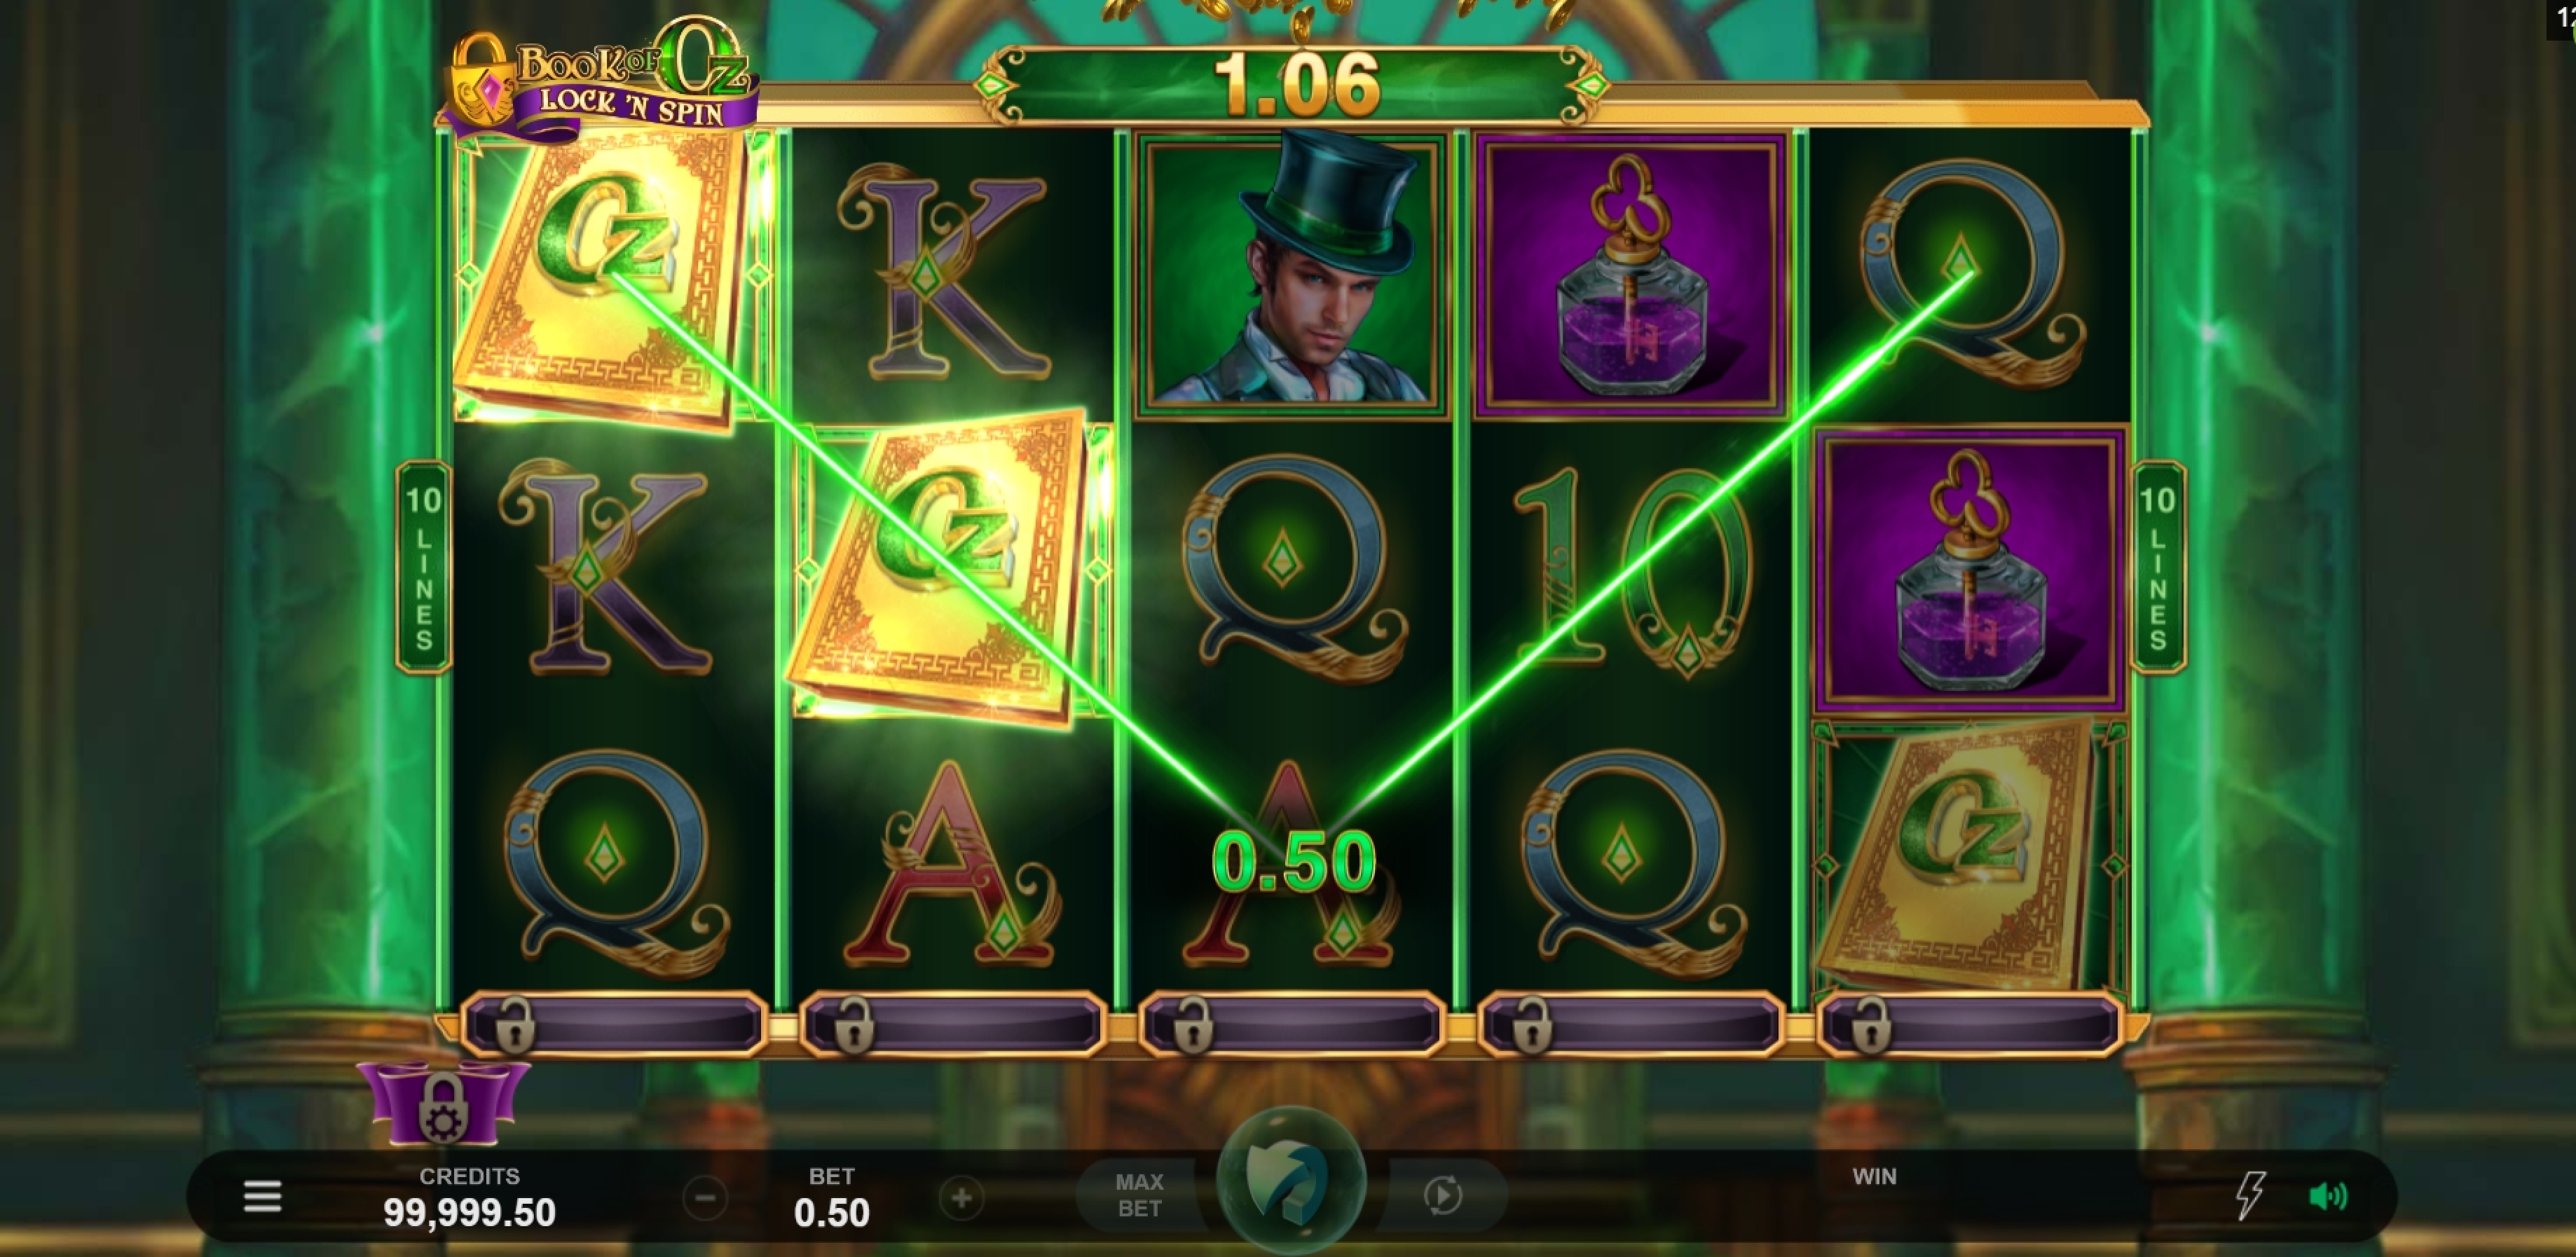 Win Money in Book of Oz Lock 'N Spin Free Slot Game by Triple Edge Studios